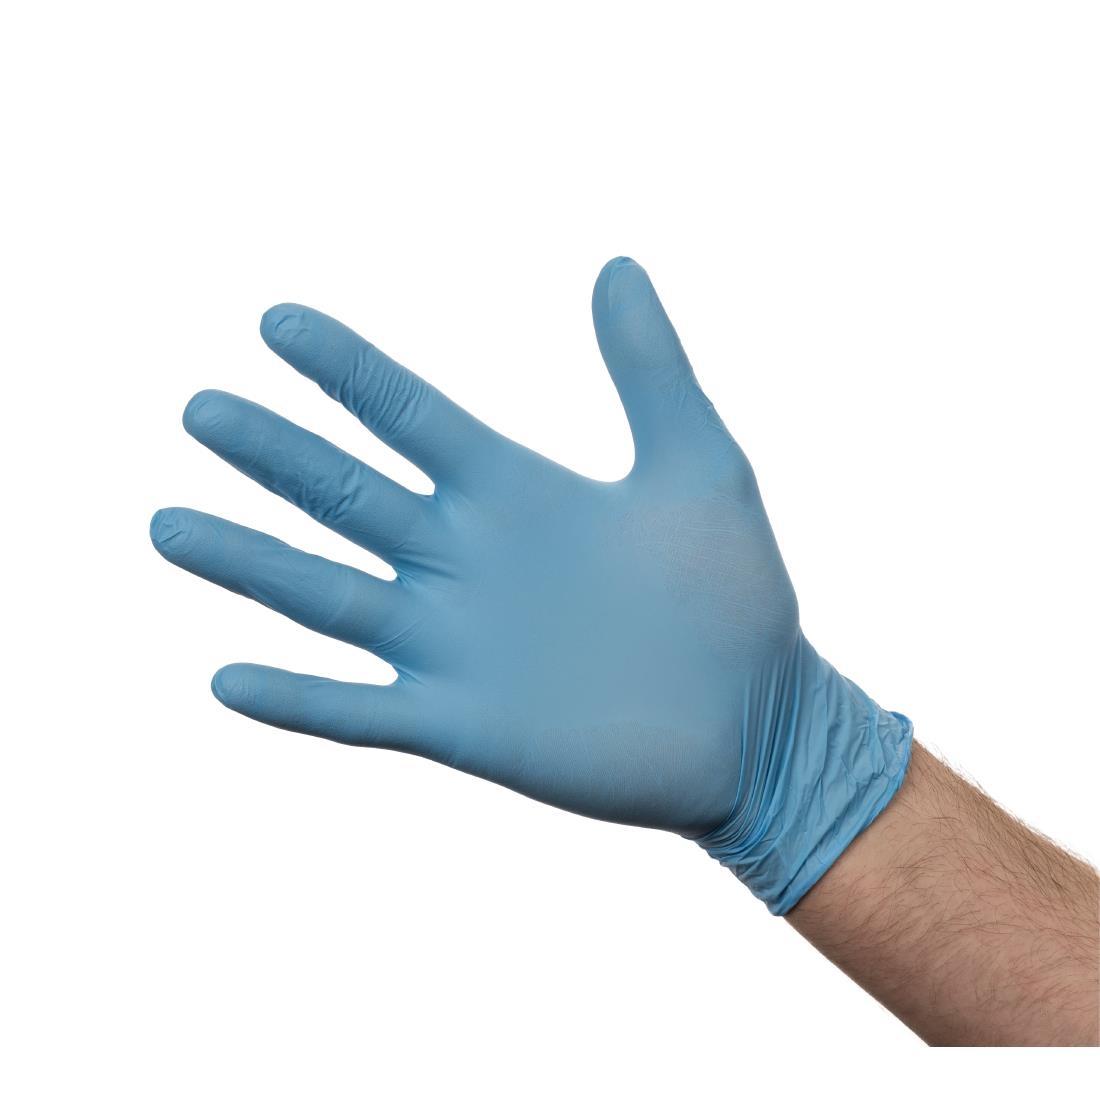 Powder-Free Nitrile Gloves Blue Small (Pack of 100) - Y478-S  - 1